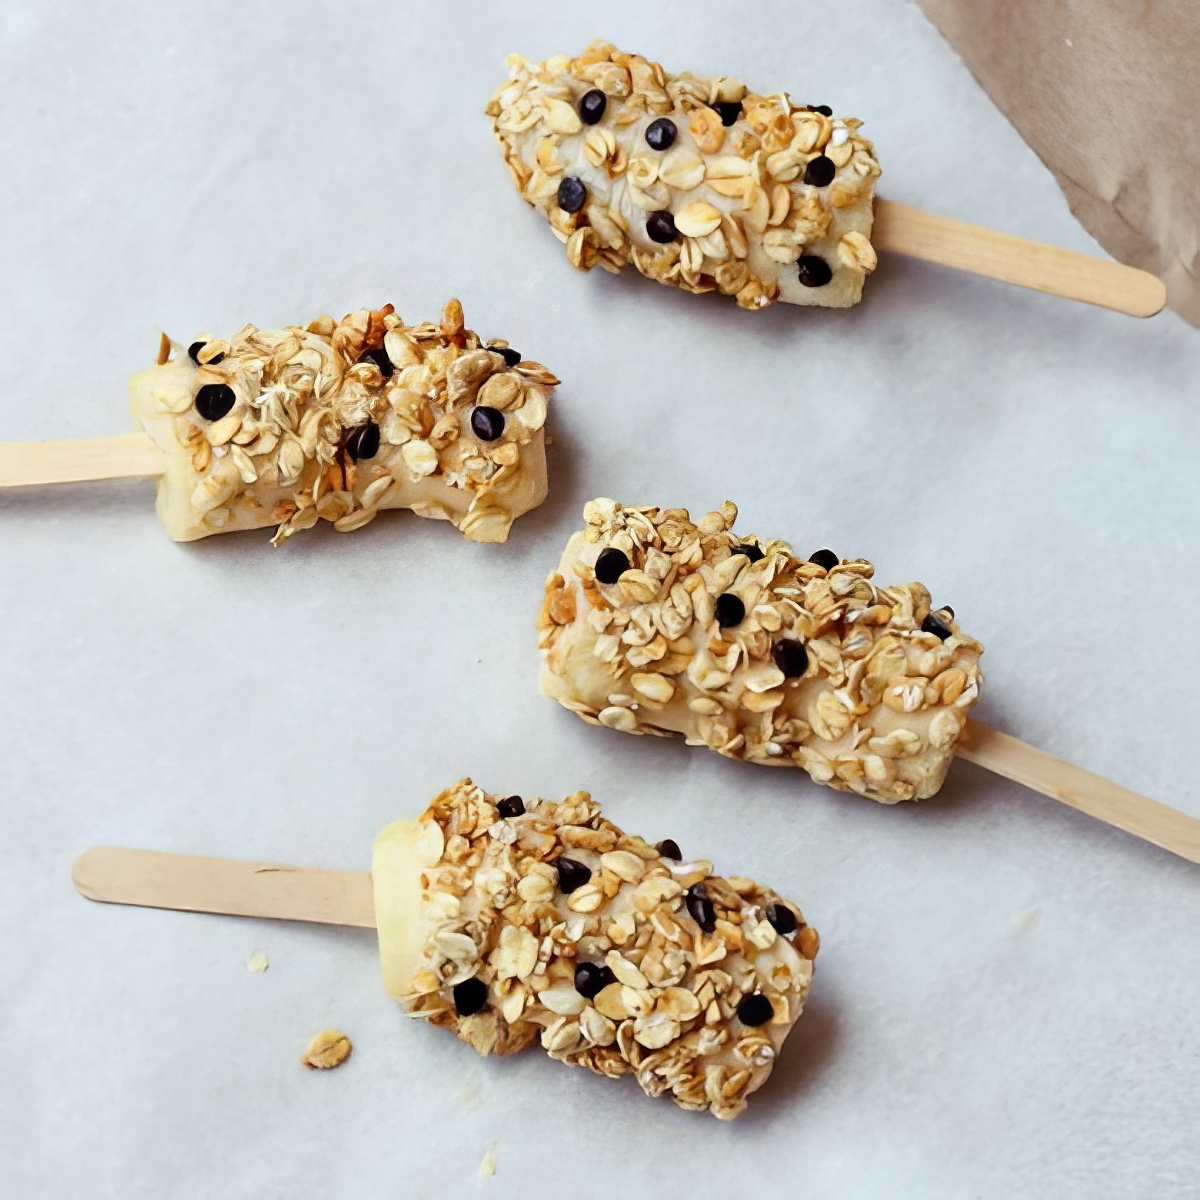 Try these easy healthy and yummy banana pops recipe for breakfast with your kids!